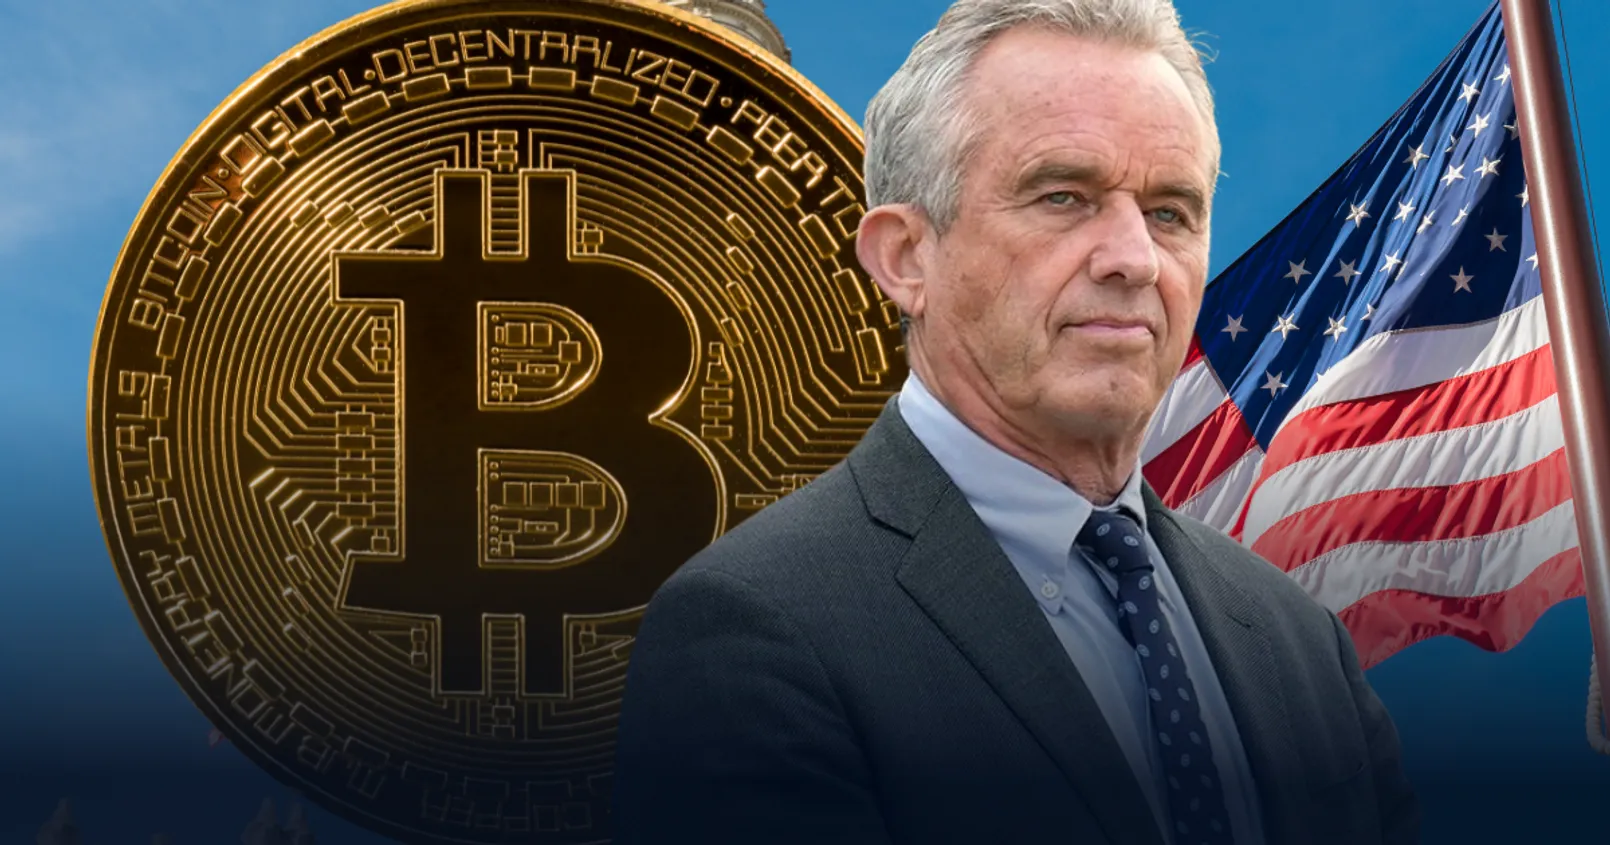 Peter Schiff Criticises RFK Jr’s Bitcoin Buy Plan As a ‘Vote-Buying’ Strategy